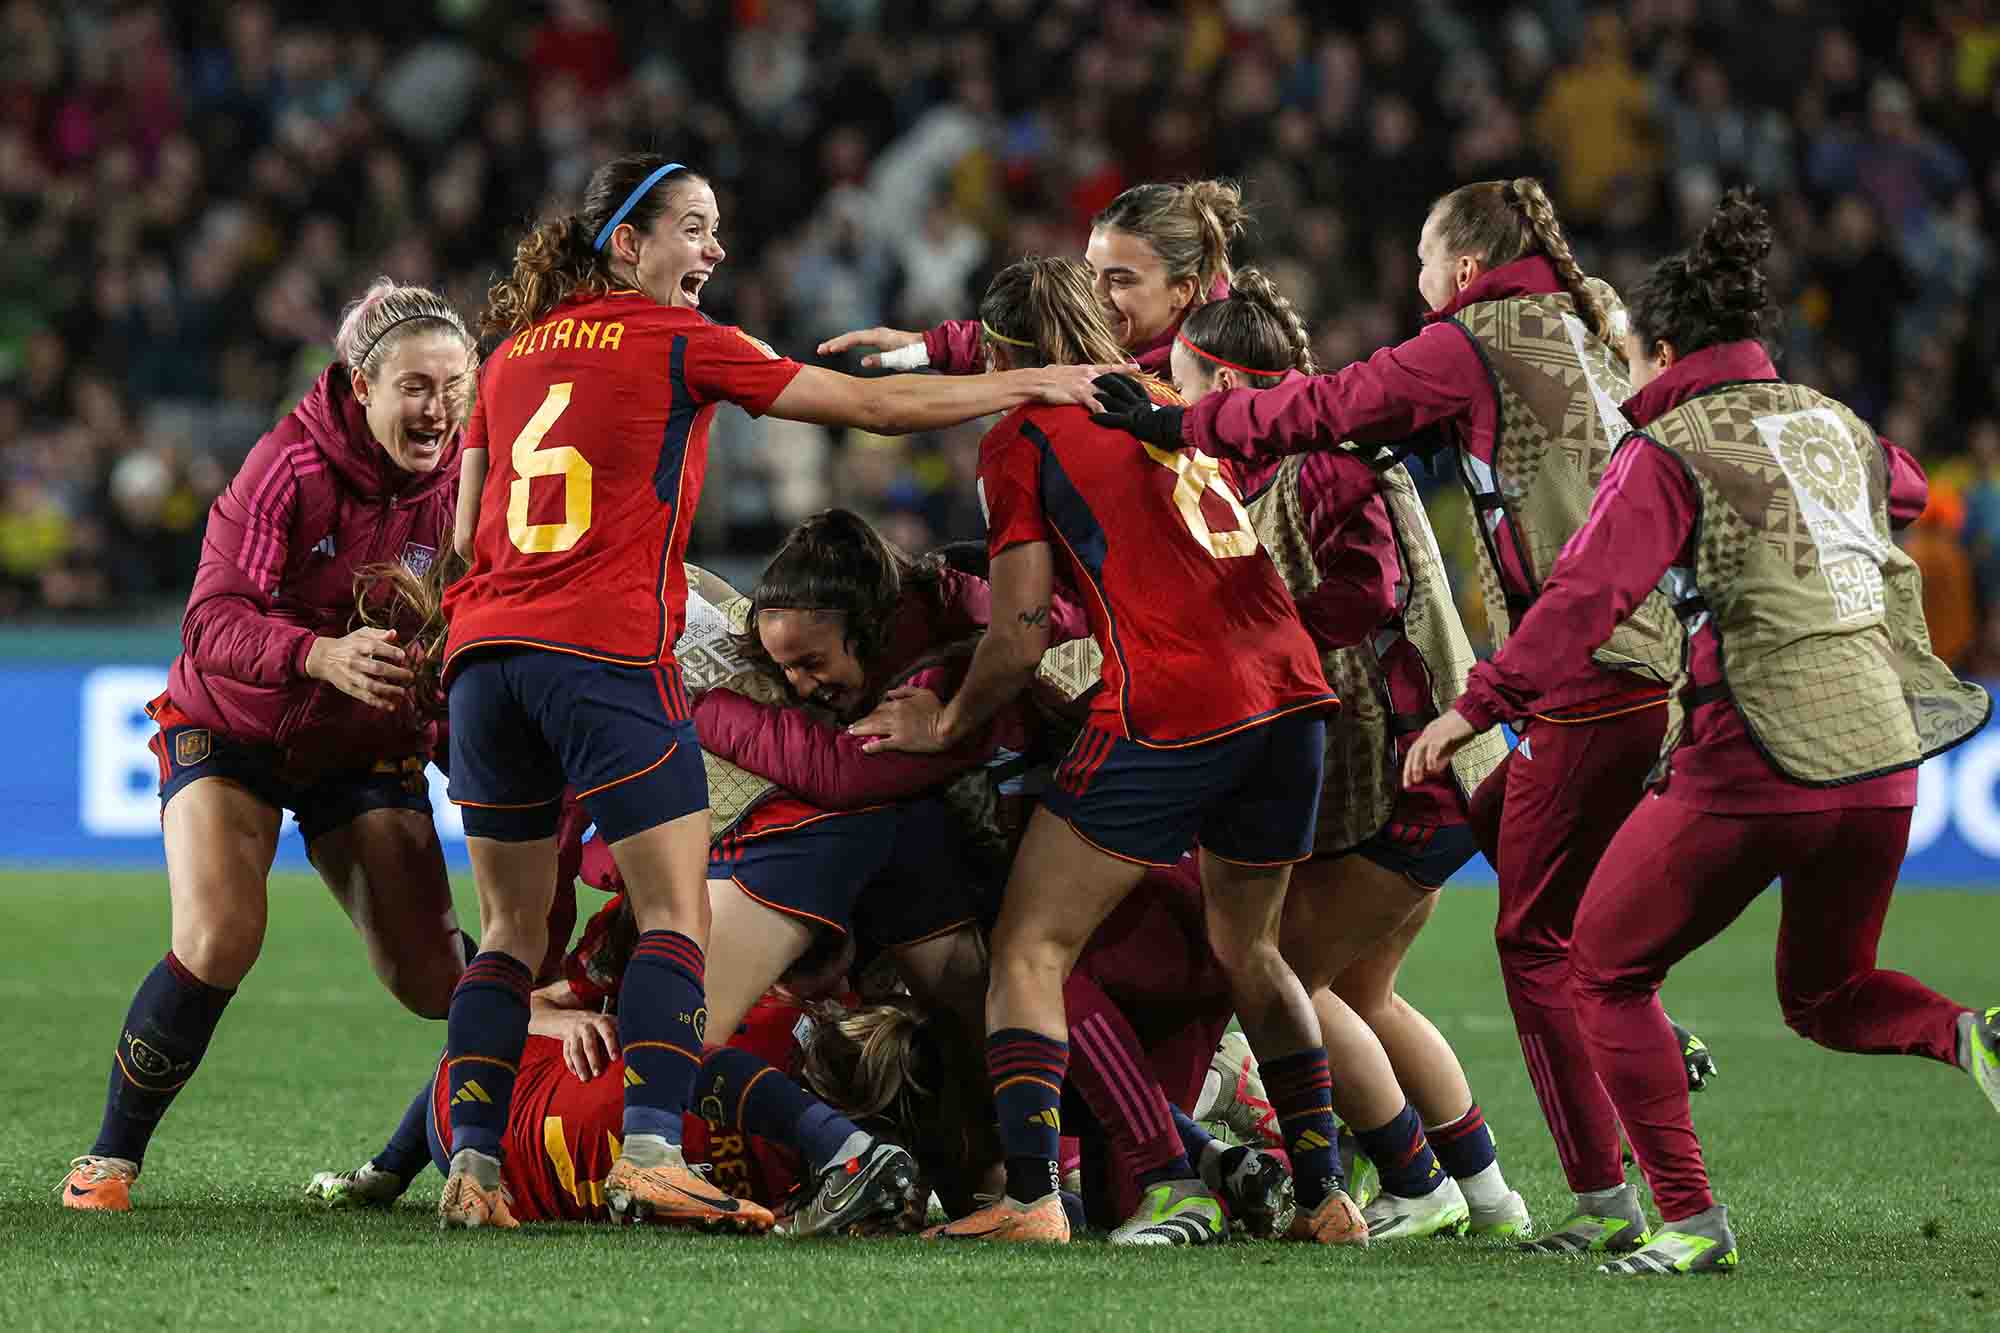 La Roja celebrates after Olga Carmona scored the winner against Sweden at Eden Park in Auckland on August 15.